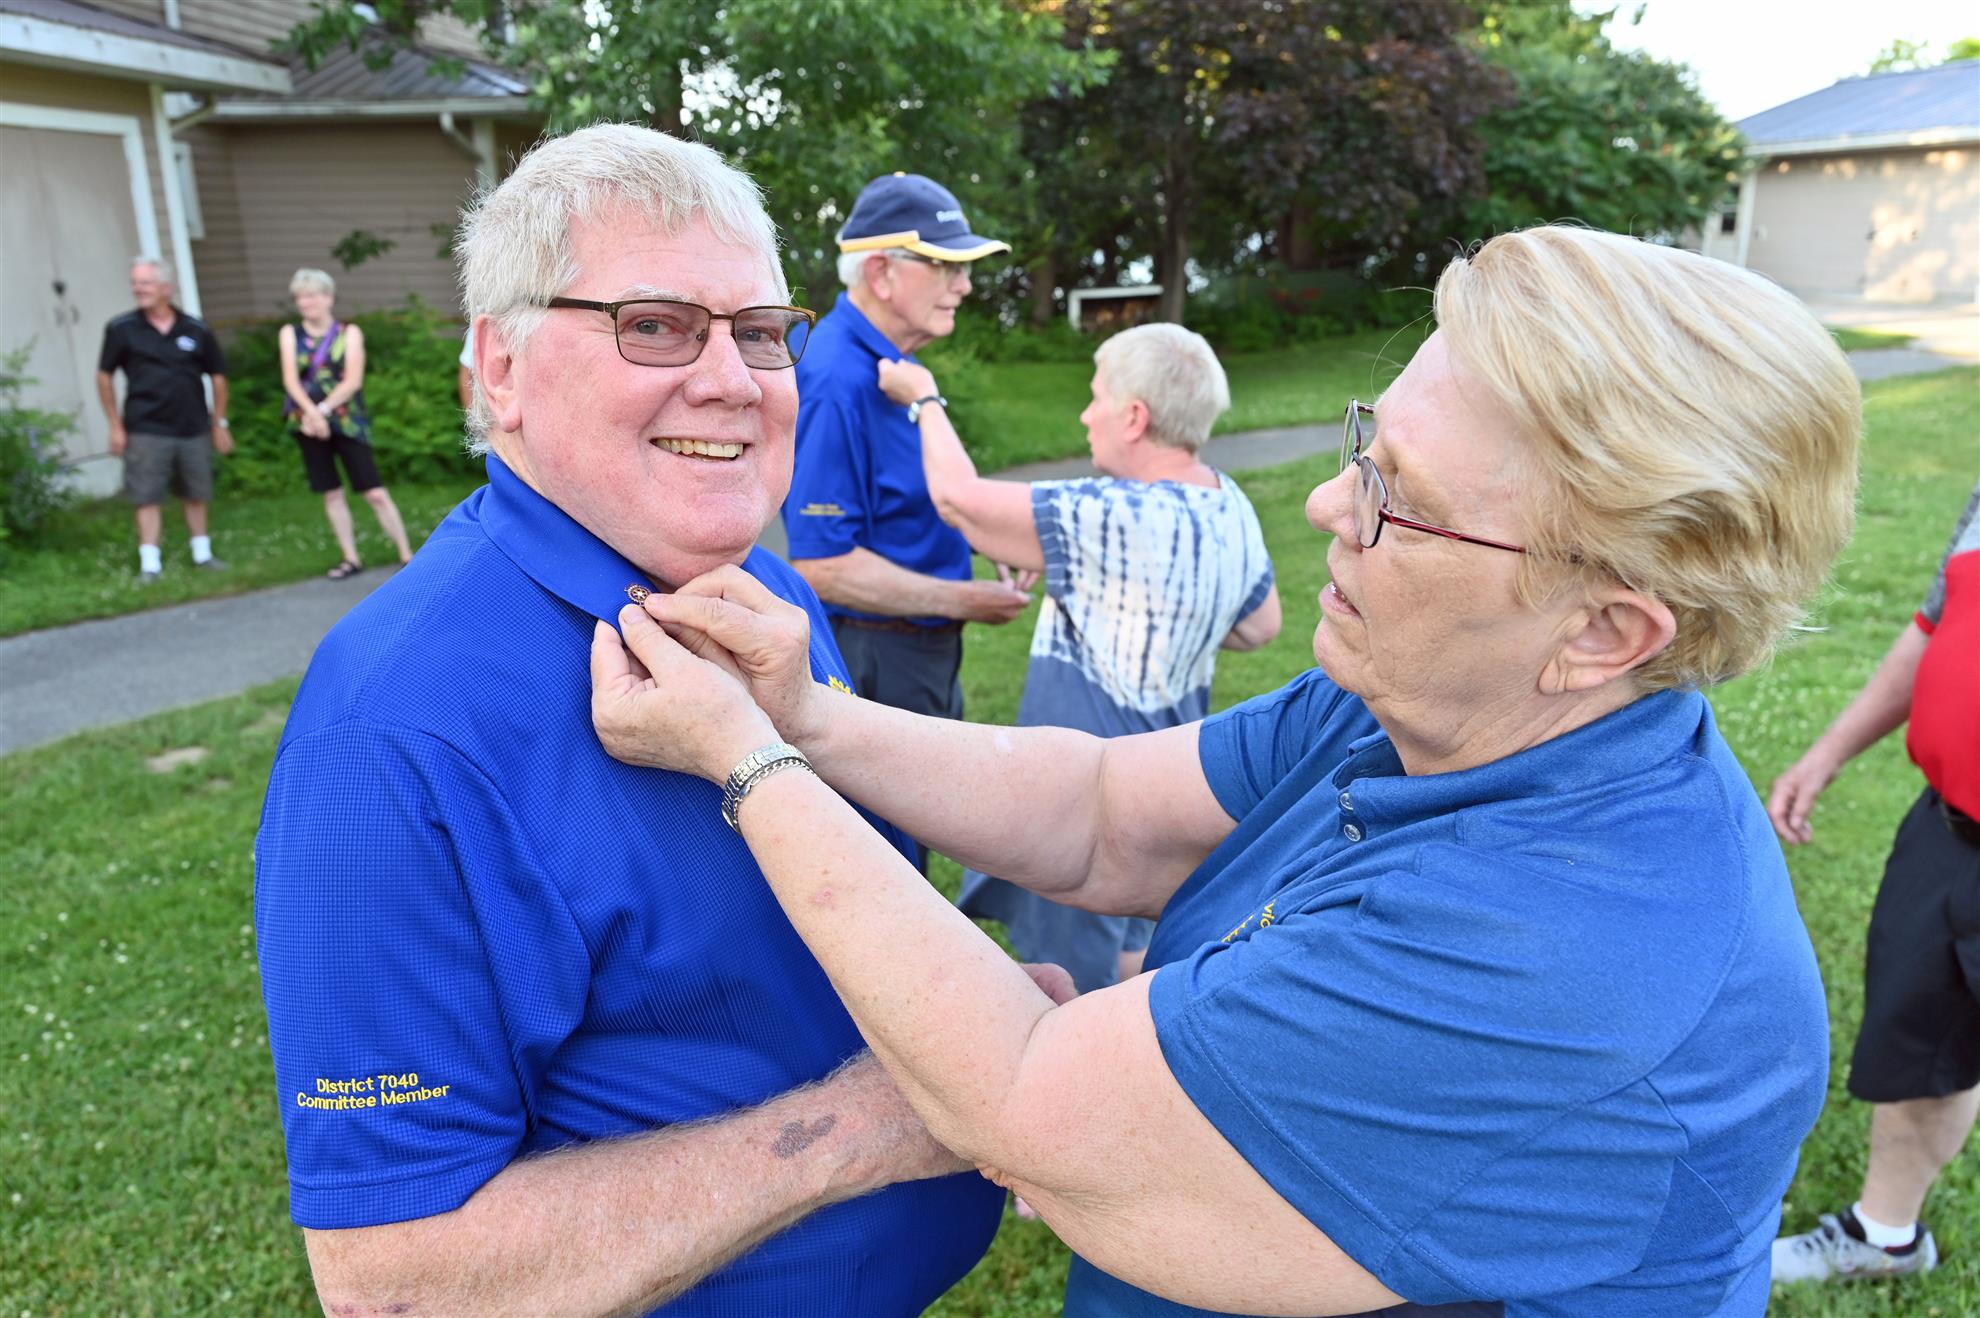 Club President Changeover at Camp Merrywood